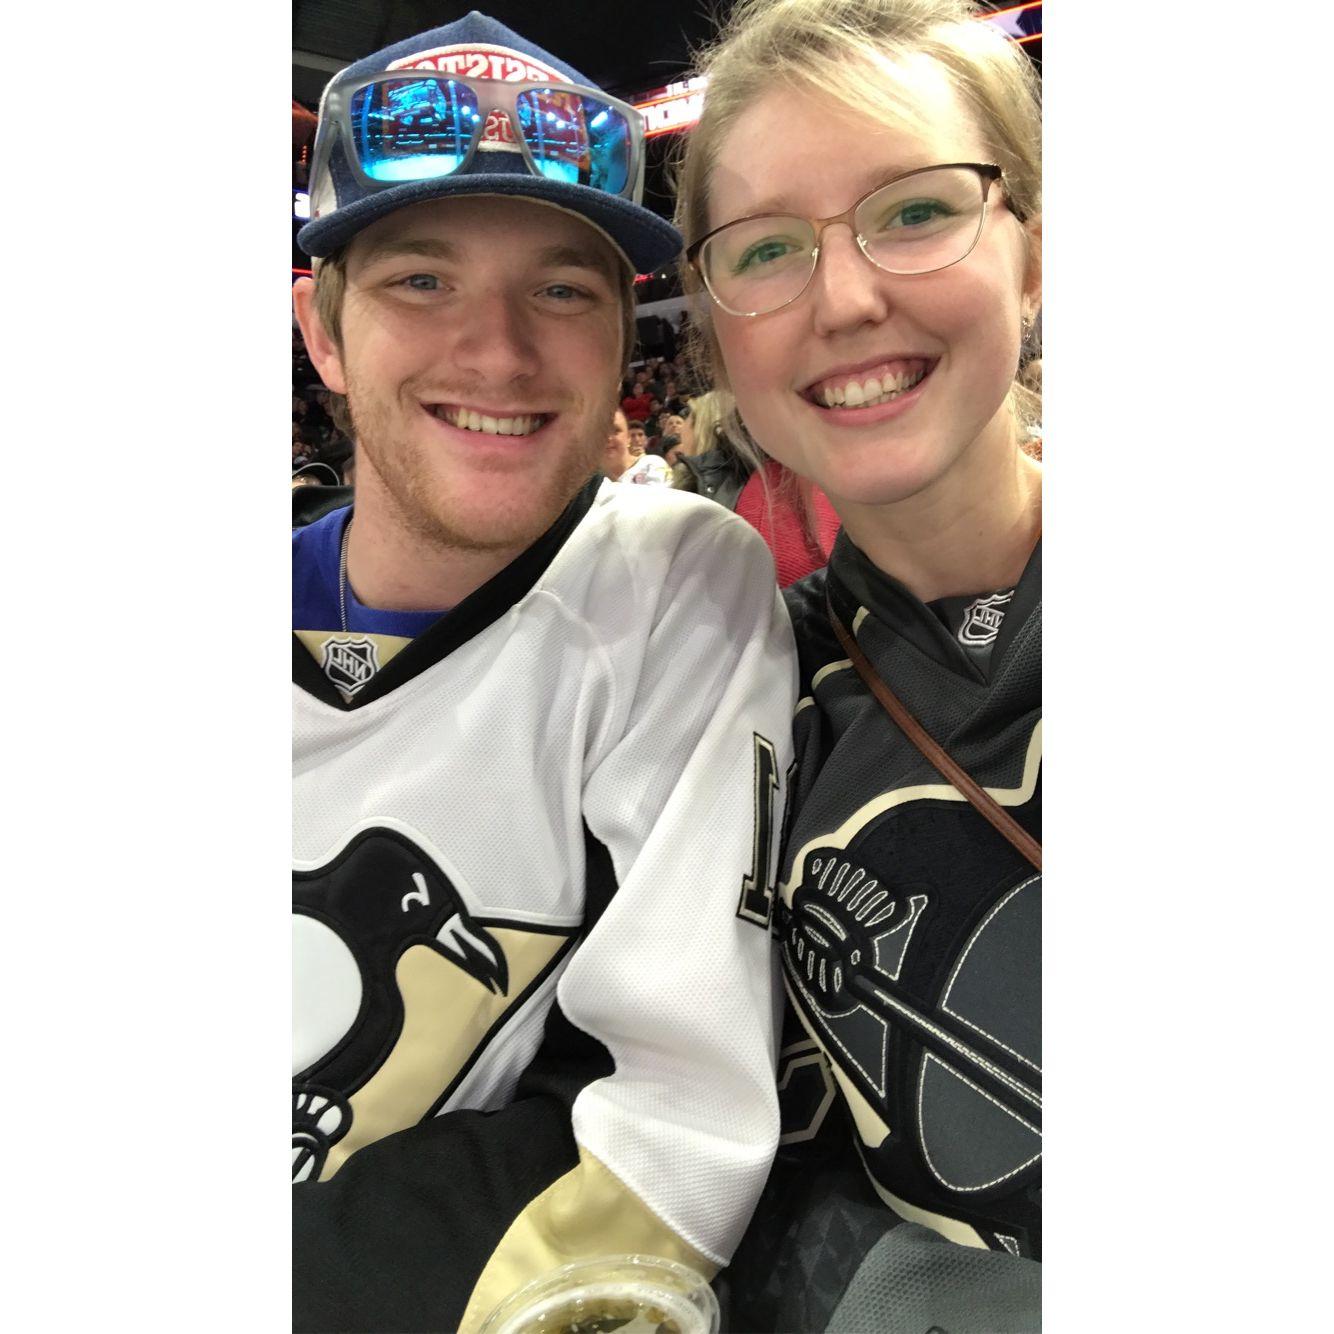 Go Penguins! 10/10 recommend hockey games